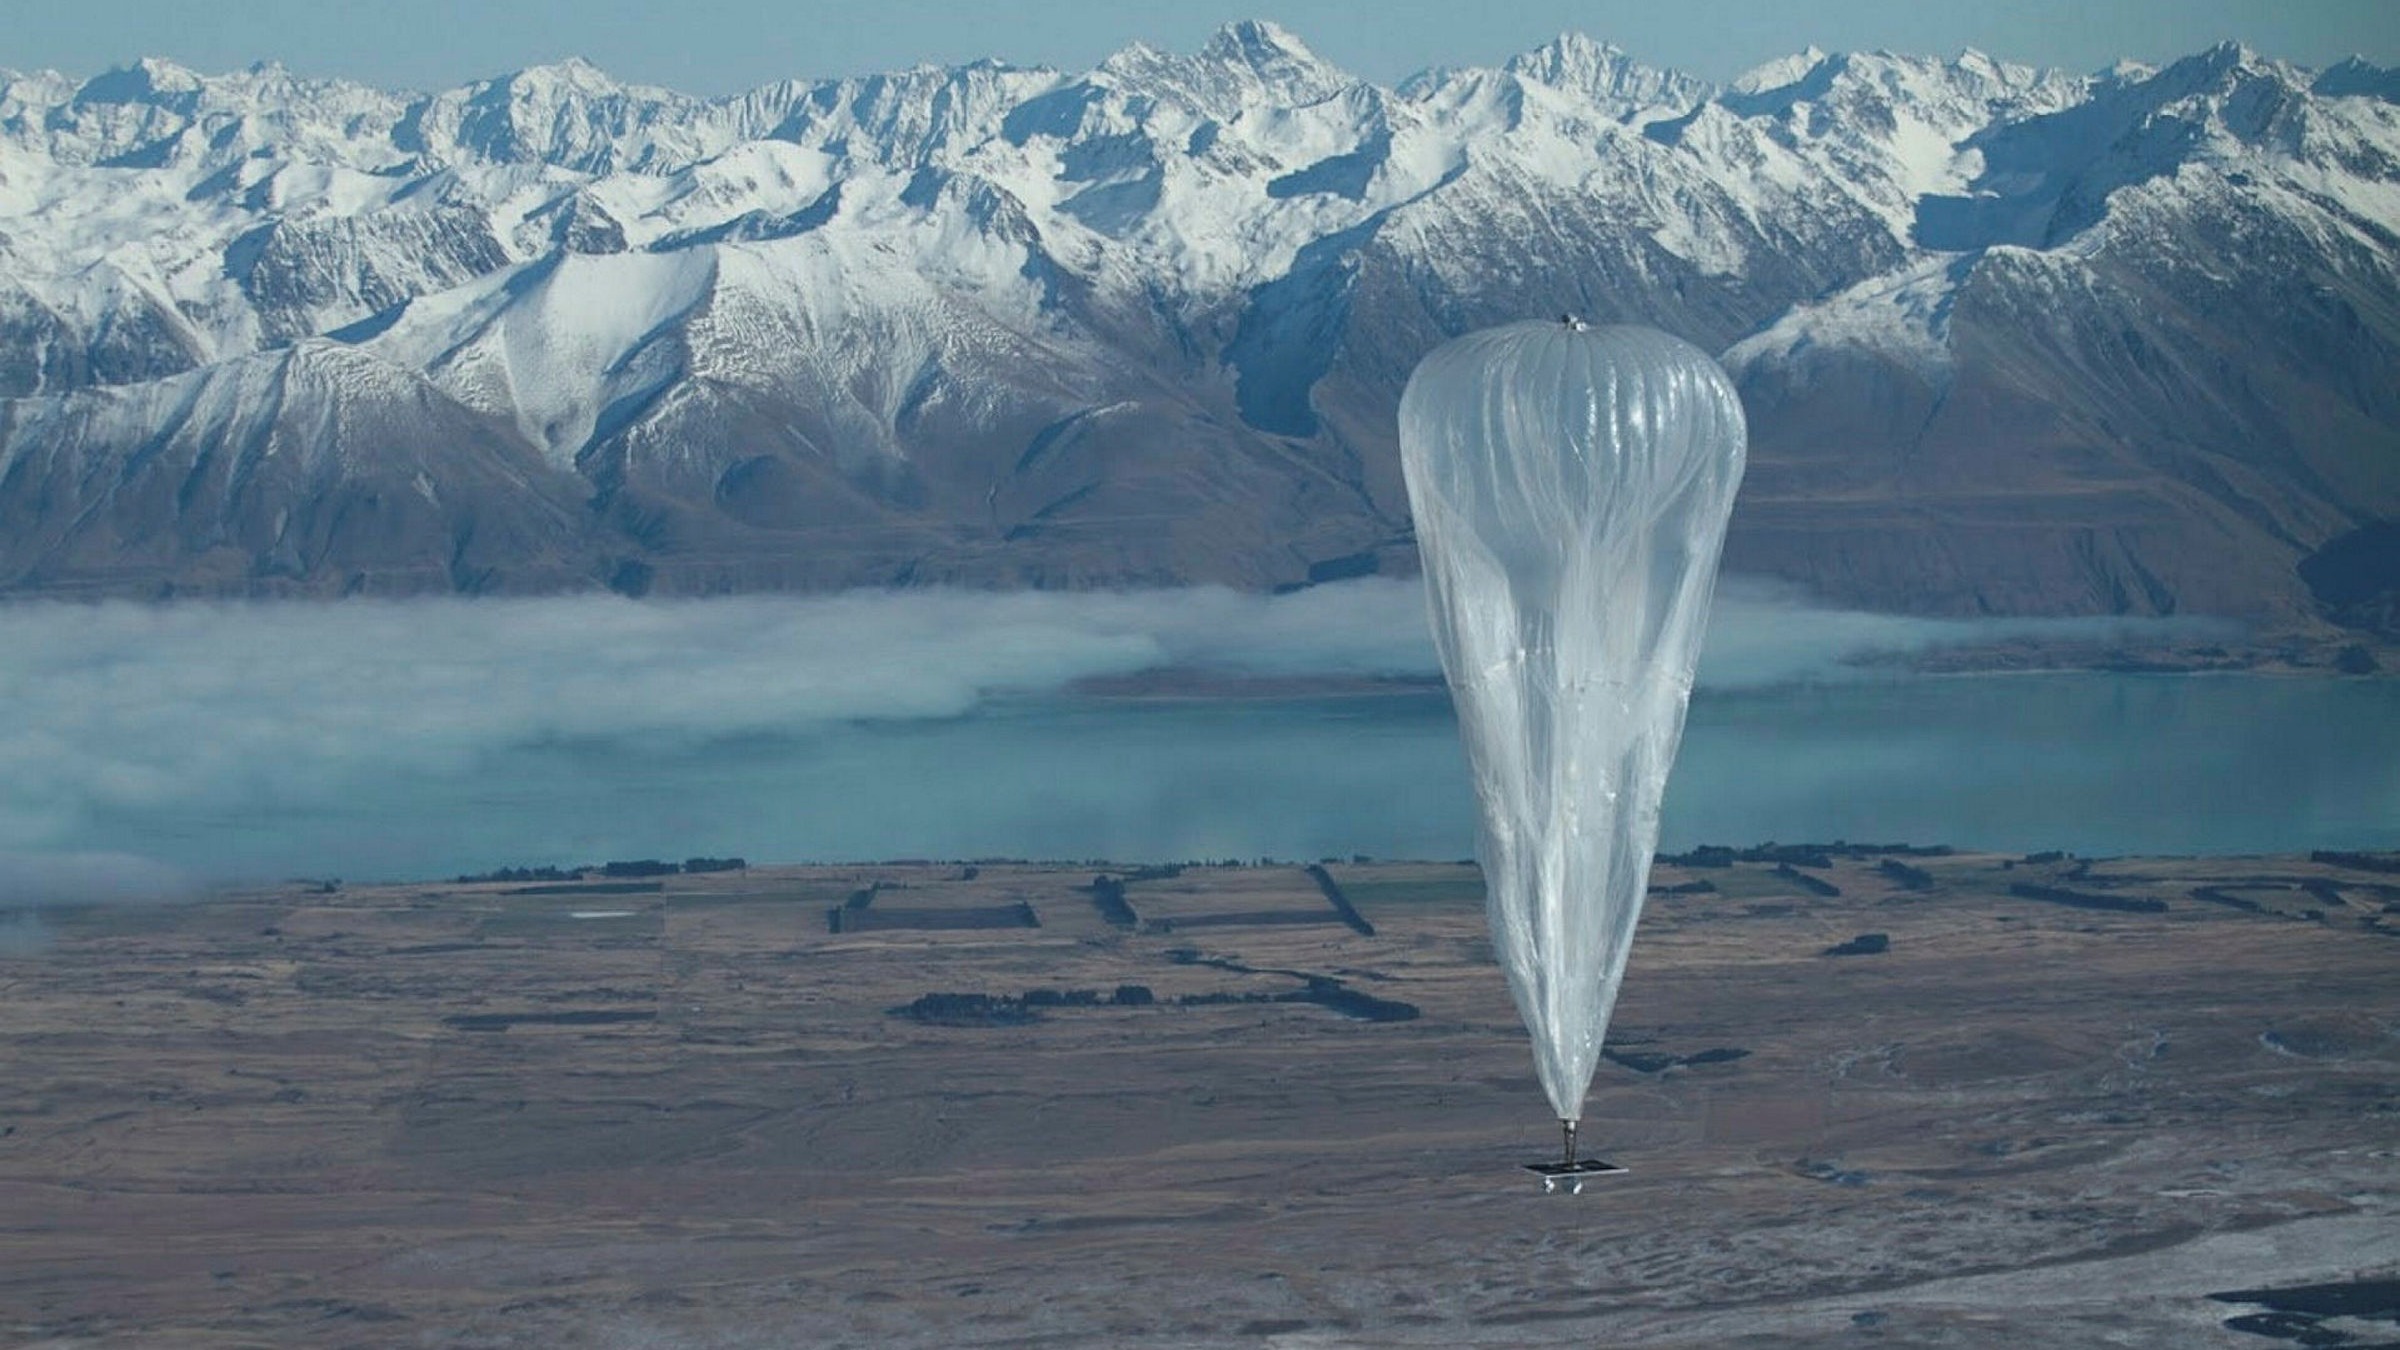 Alphabet's internet balloons remain grounded in Kenya | Financial Times